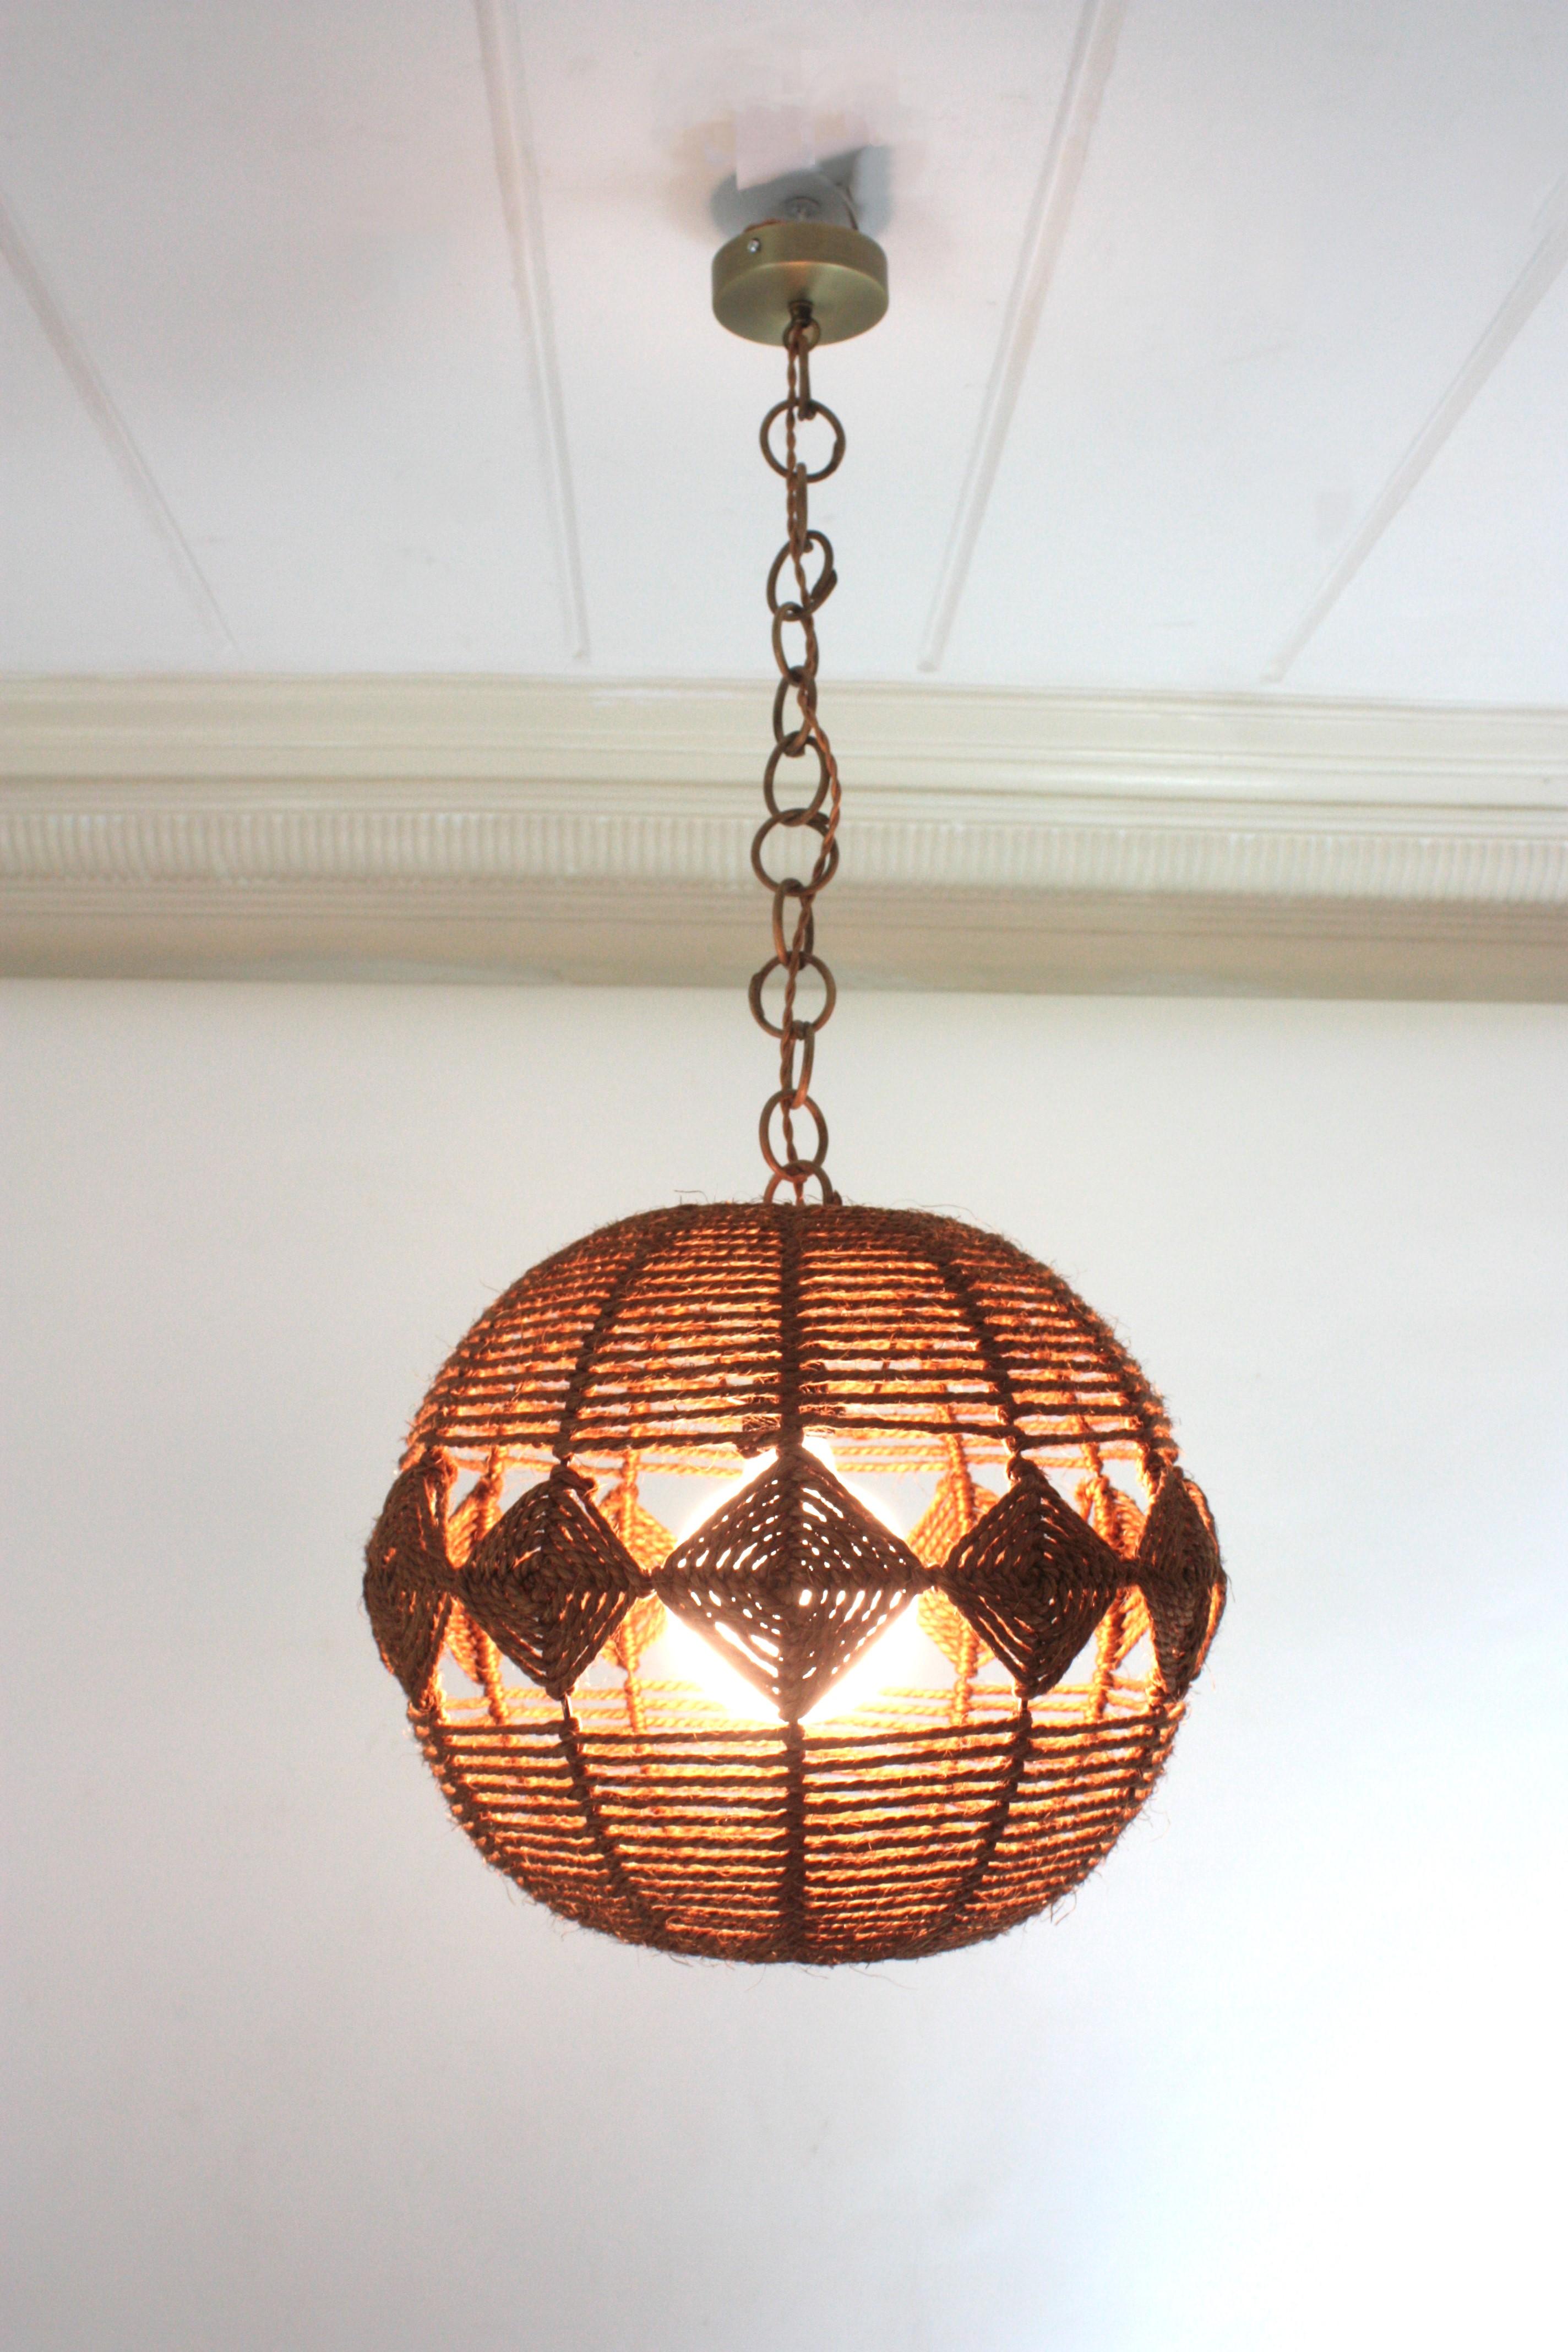 Eye-catching ball shaped rope pendant light with rhombus decorative details, Spain, 1960s
This midcentury suspension lamp features a hand woven rope shpere lampshade in brown ginger color accented by rhombus details. It hangs from a chain with